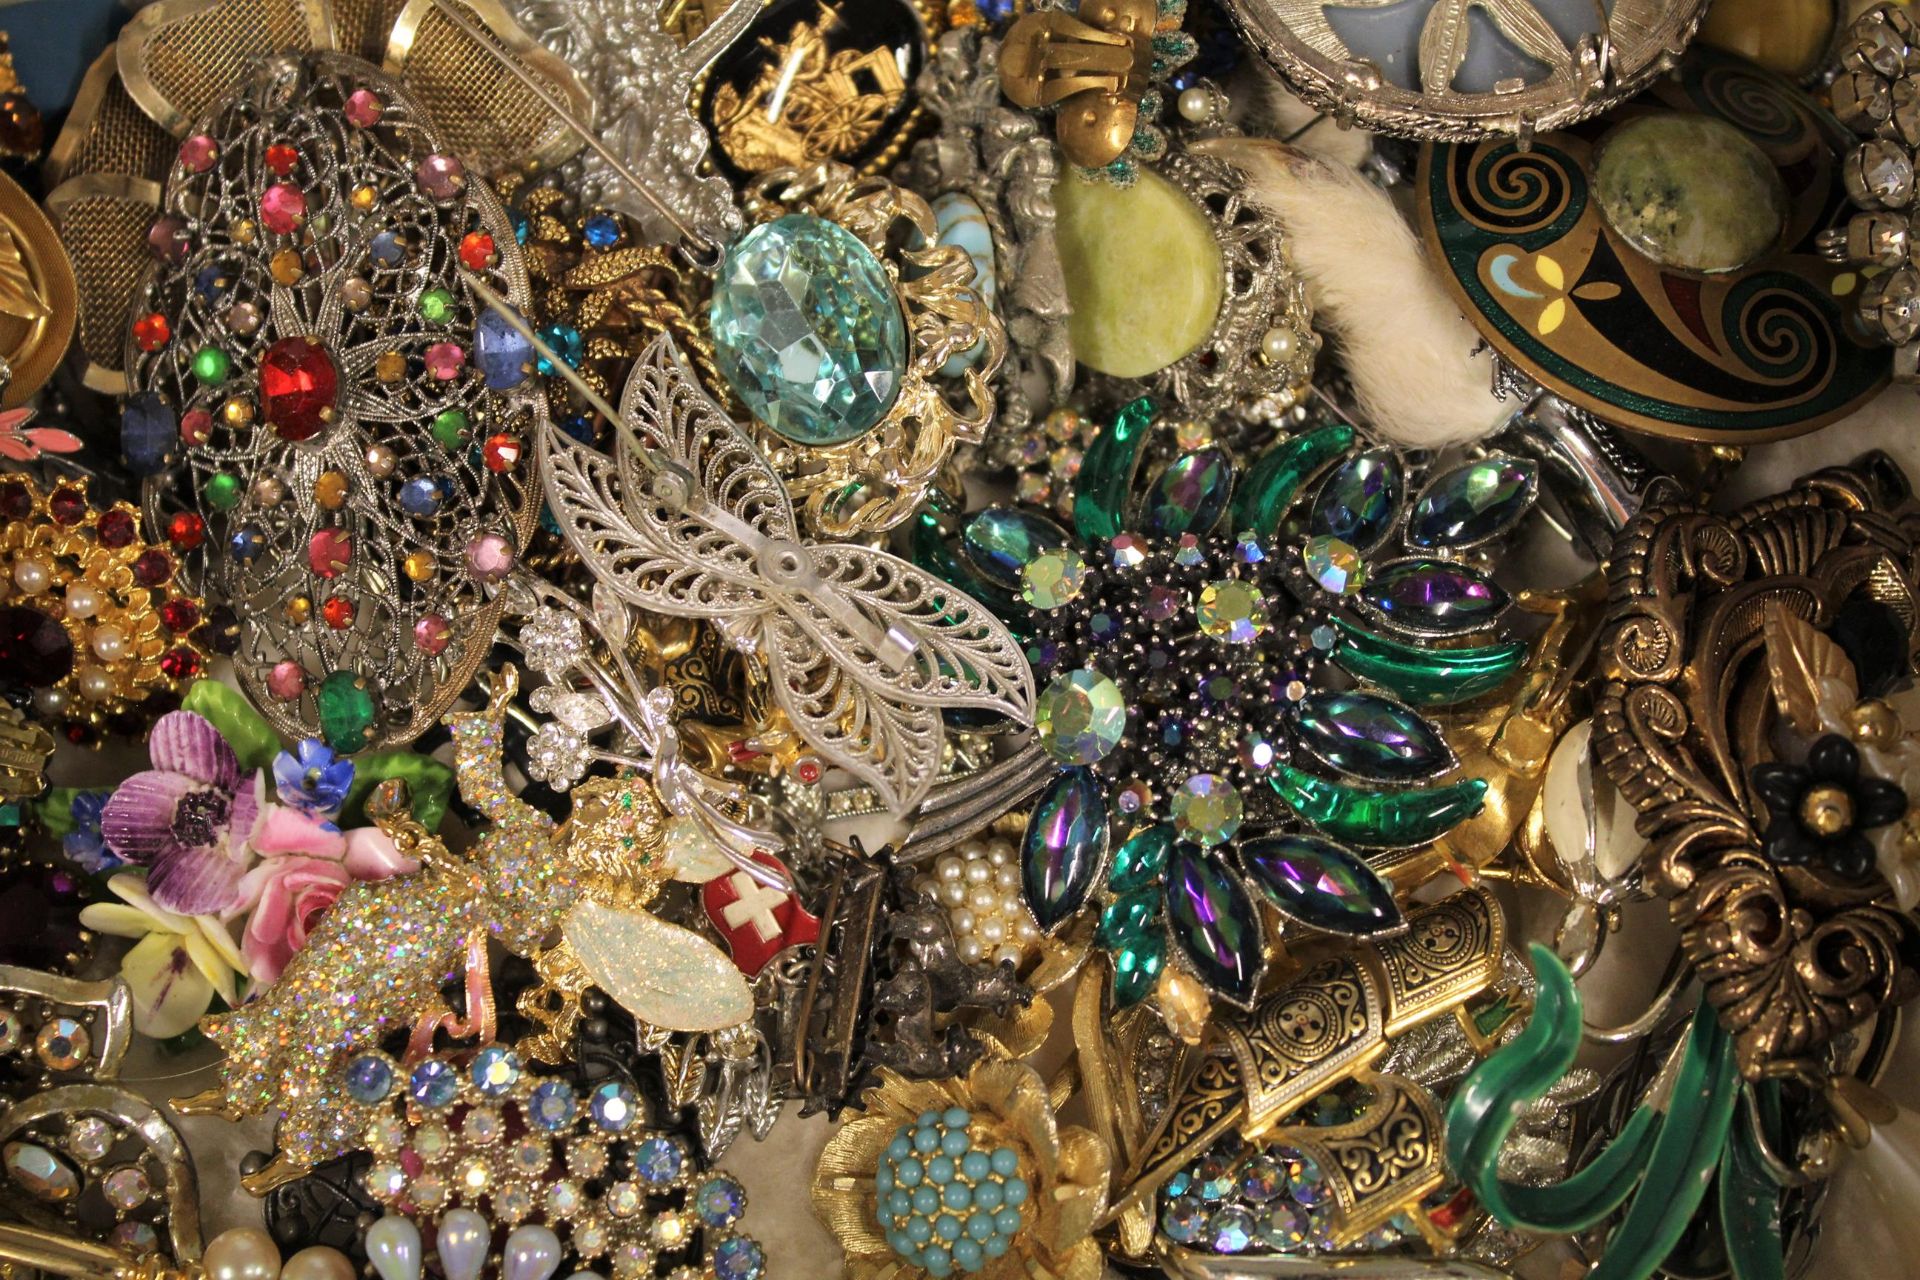 A Good Large Collection of Vintage Costume Brooches, Jewellery etc. (Est £20-£40) - Image 3 of 6